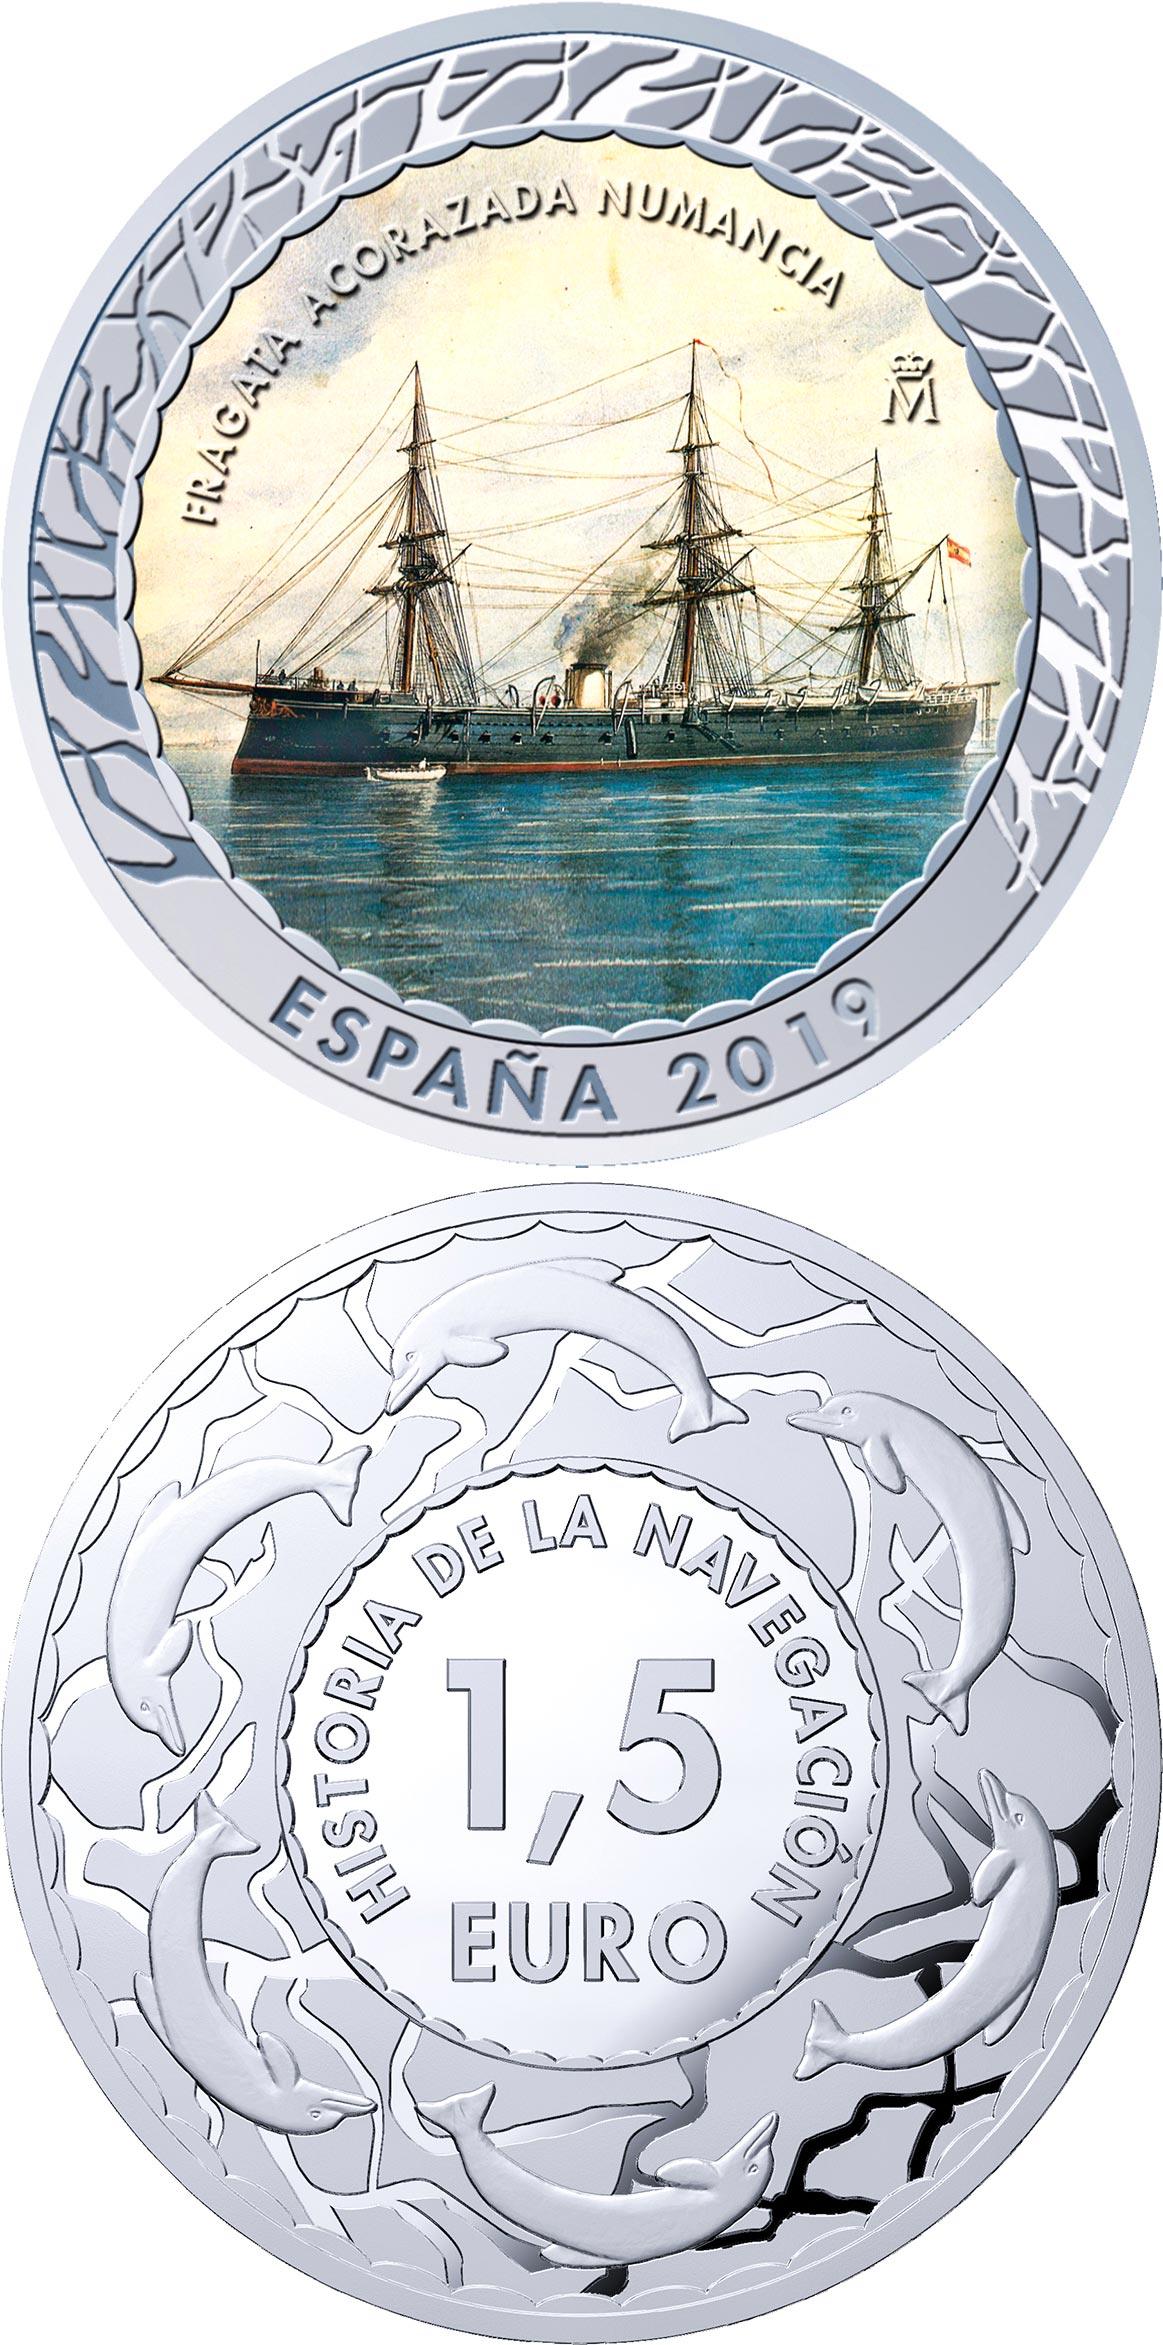 Image of 1.5 euro coin - Spanish Ironclad Numancia | Spain 2019.  The Copper–Nickel (CuNi) coin is of BU quality.